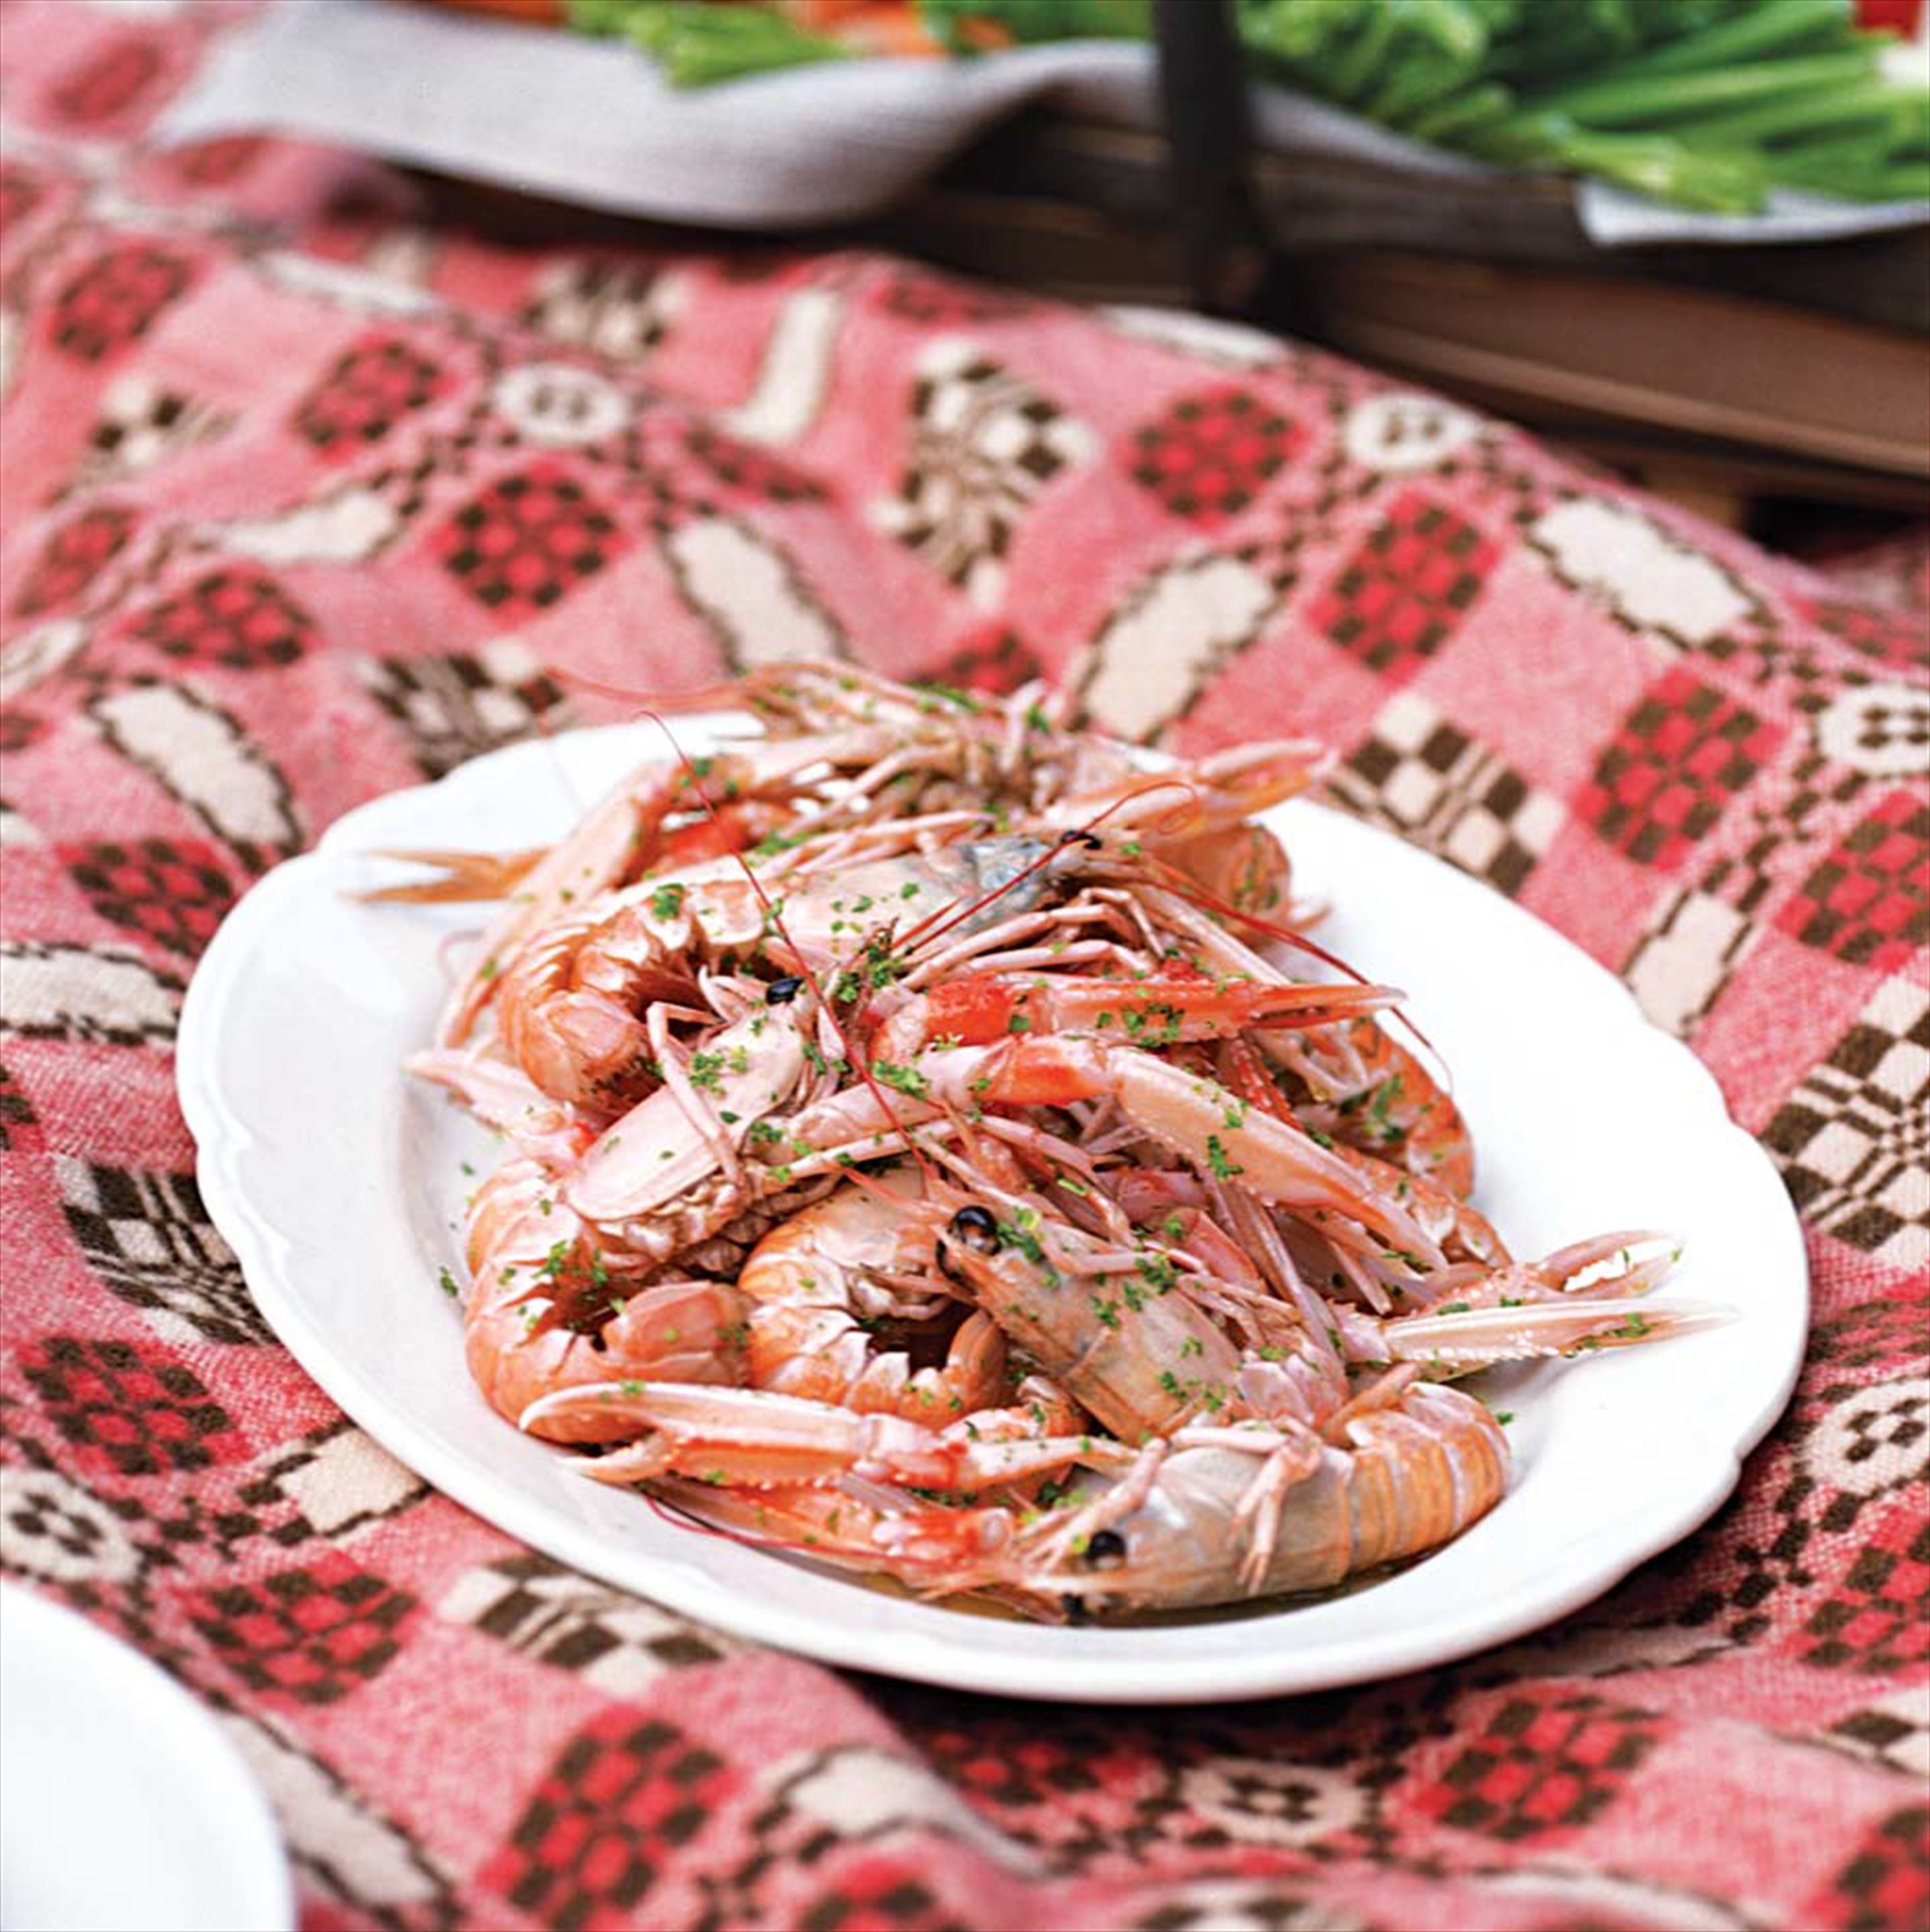 Poached langoustines with green goddess dressing